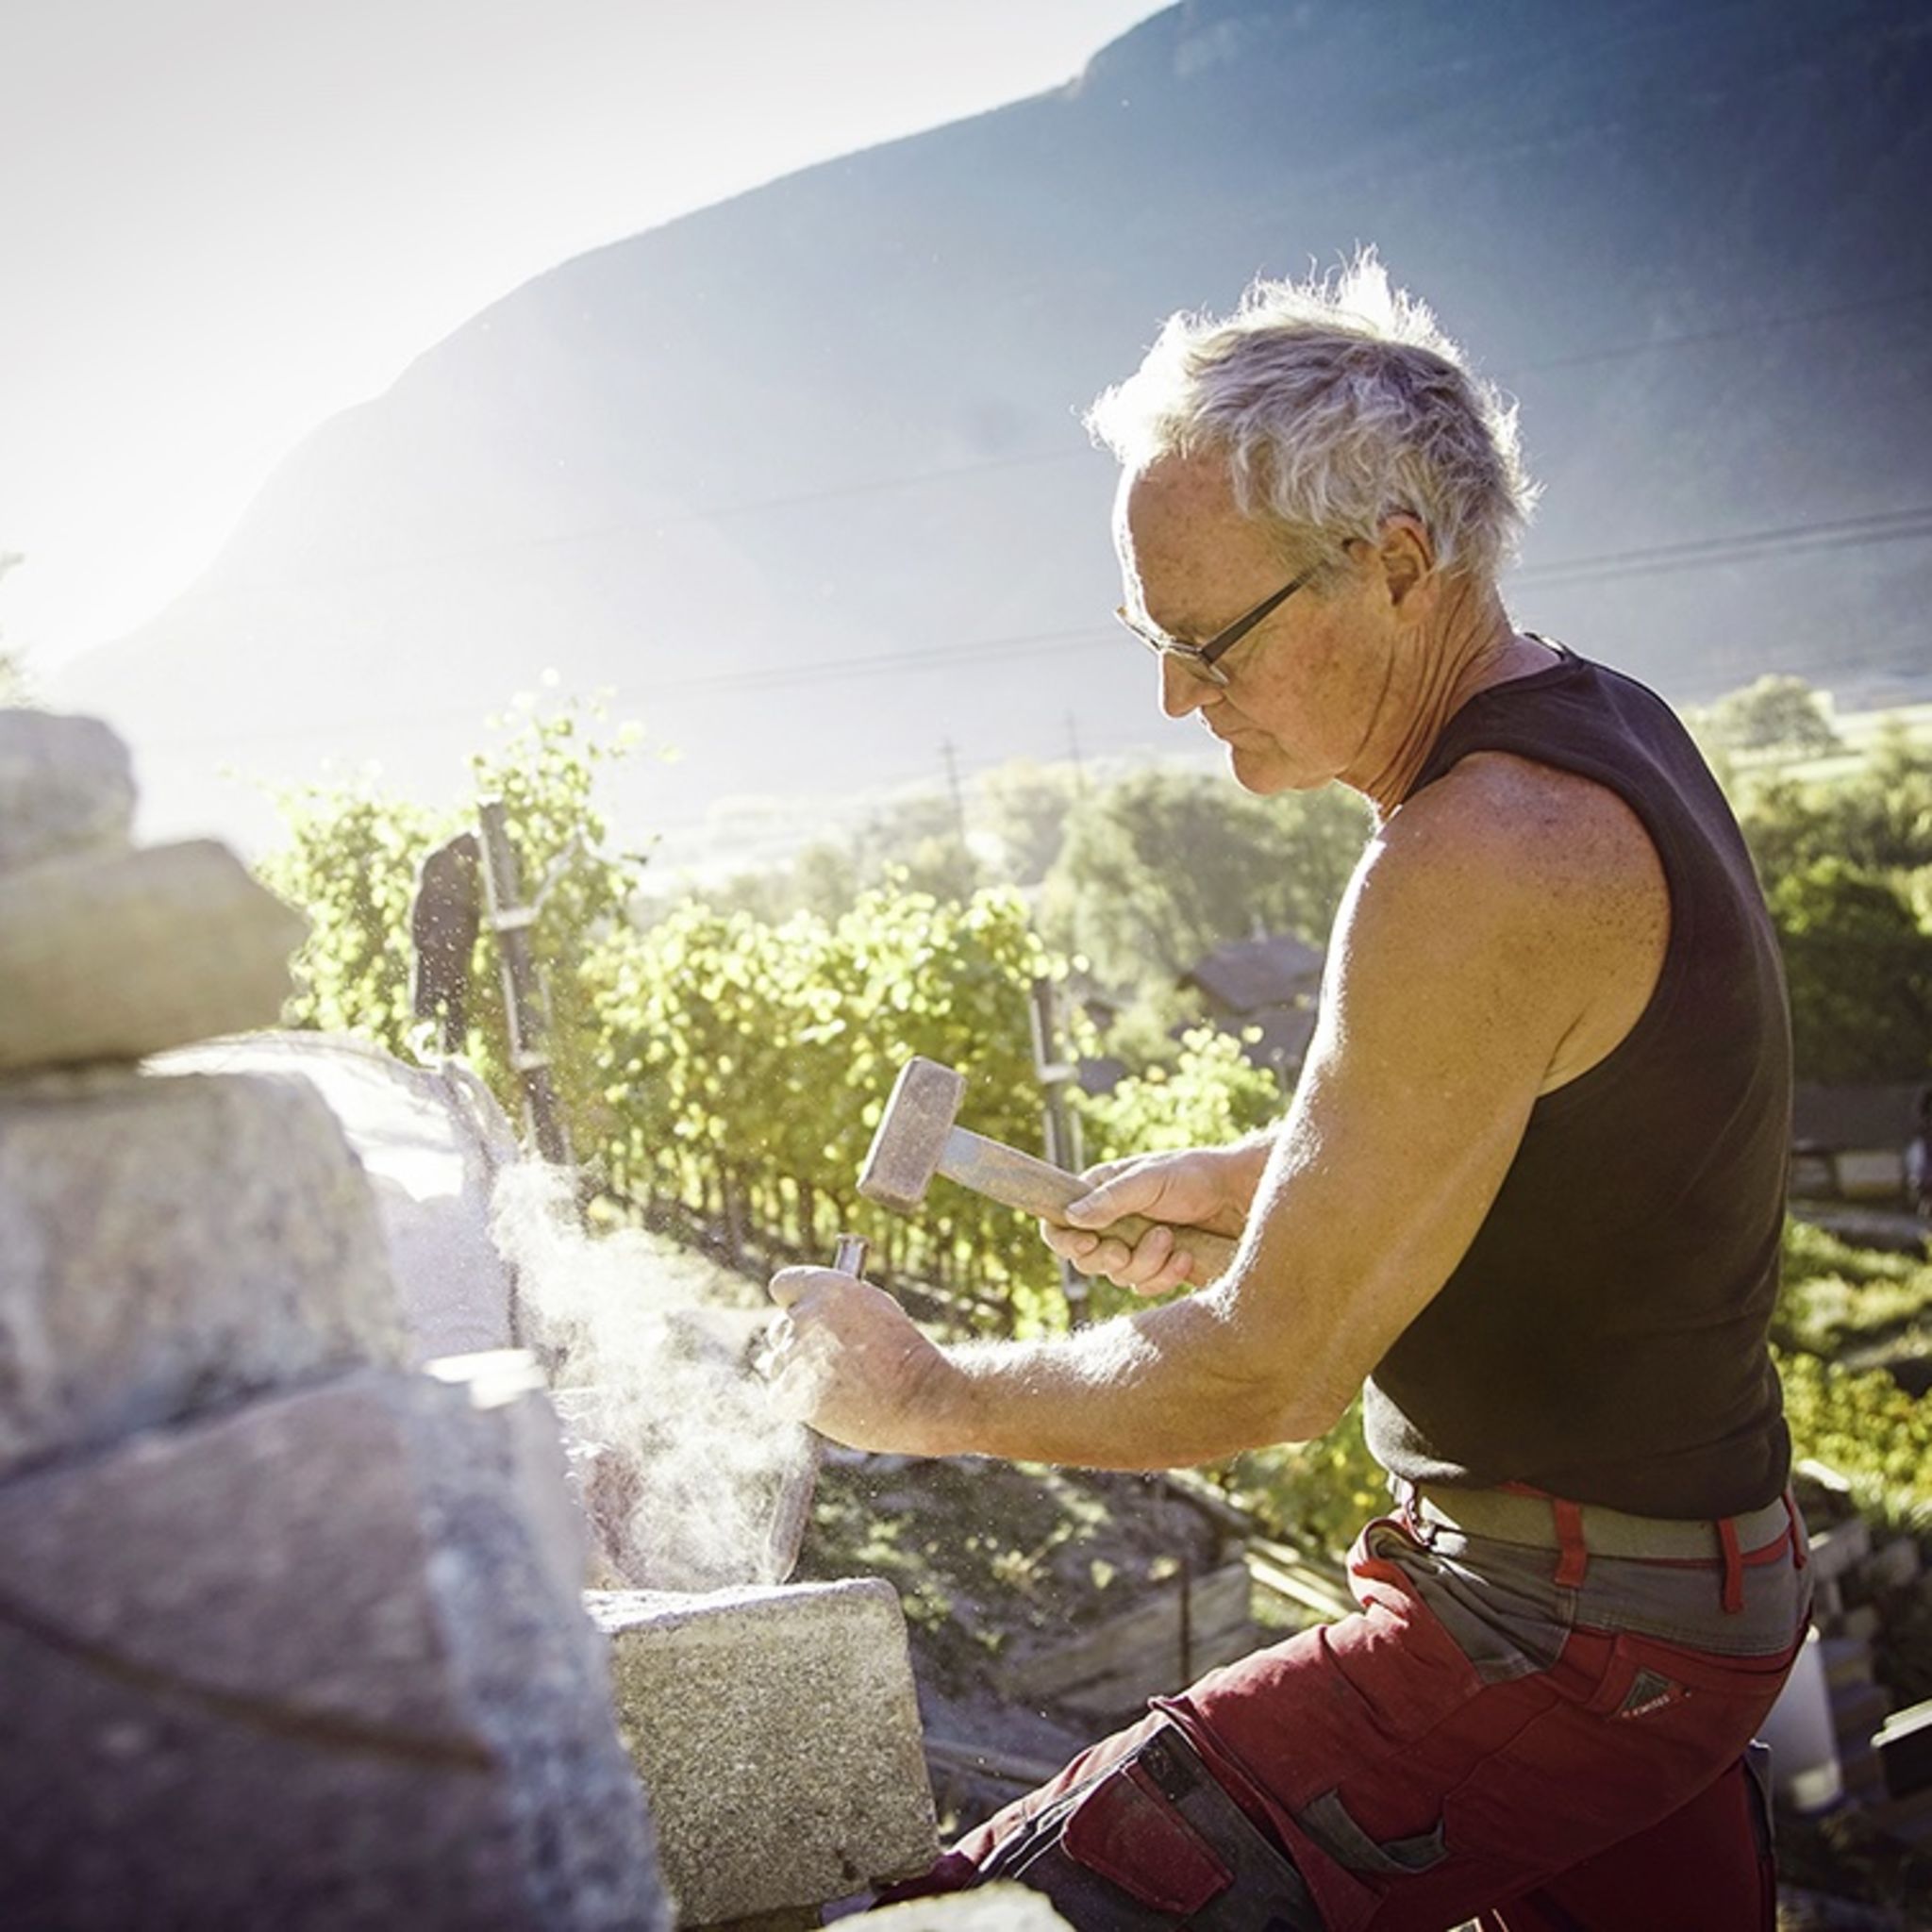 Beat Locher at work. Together with his partner, he specialises in the restoration and maintenance of dry stone walls. Valais, Switzerland.